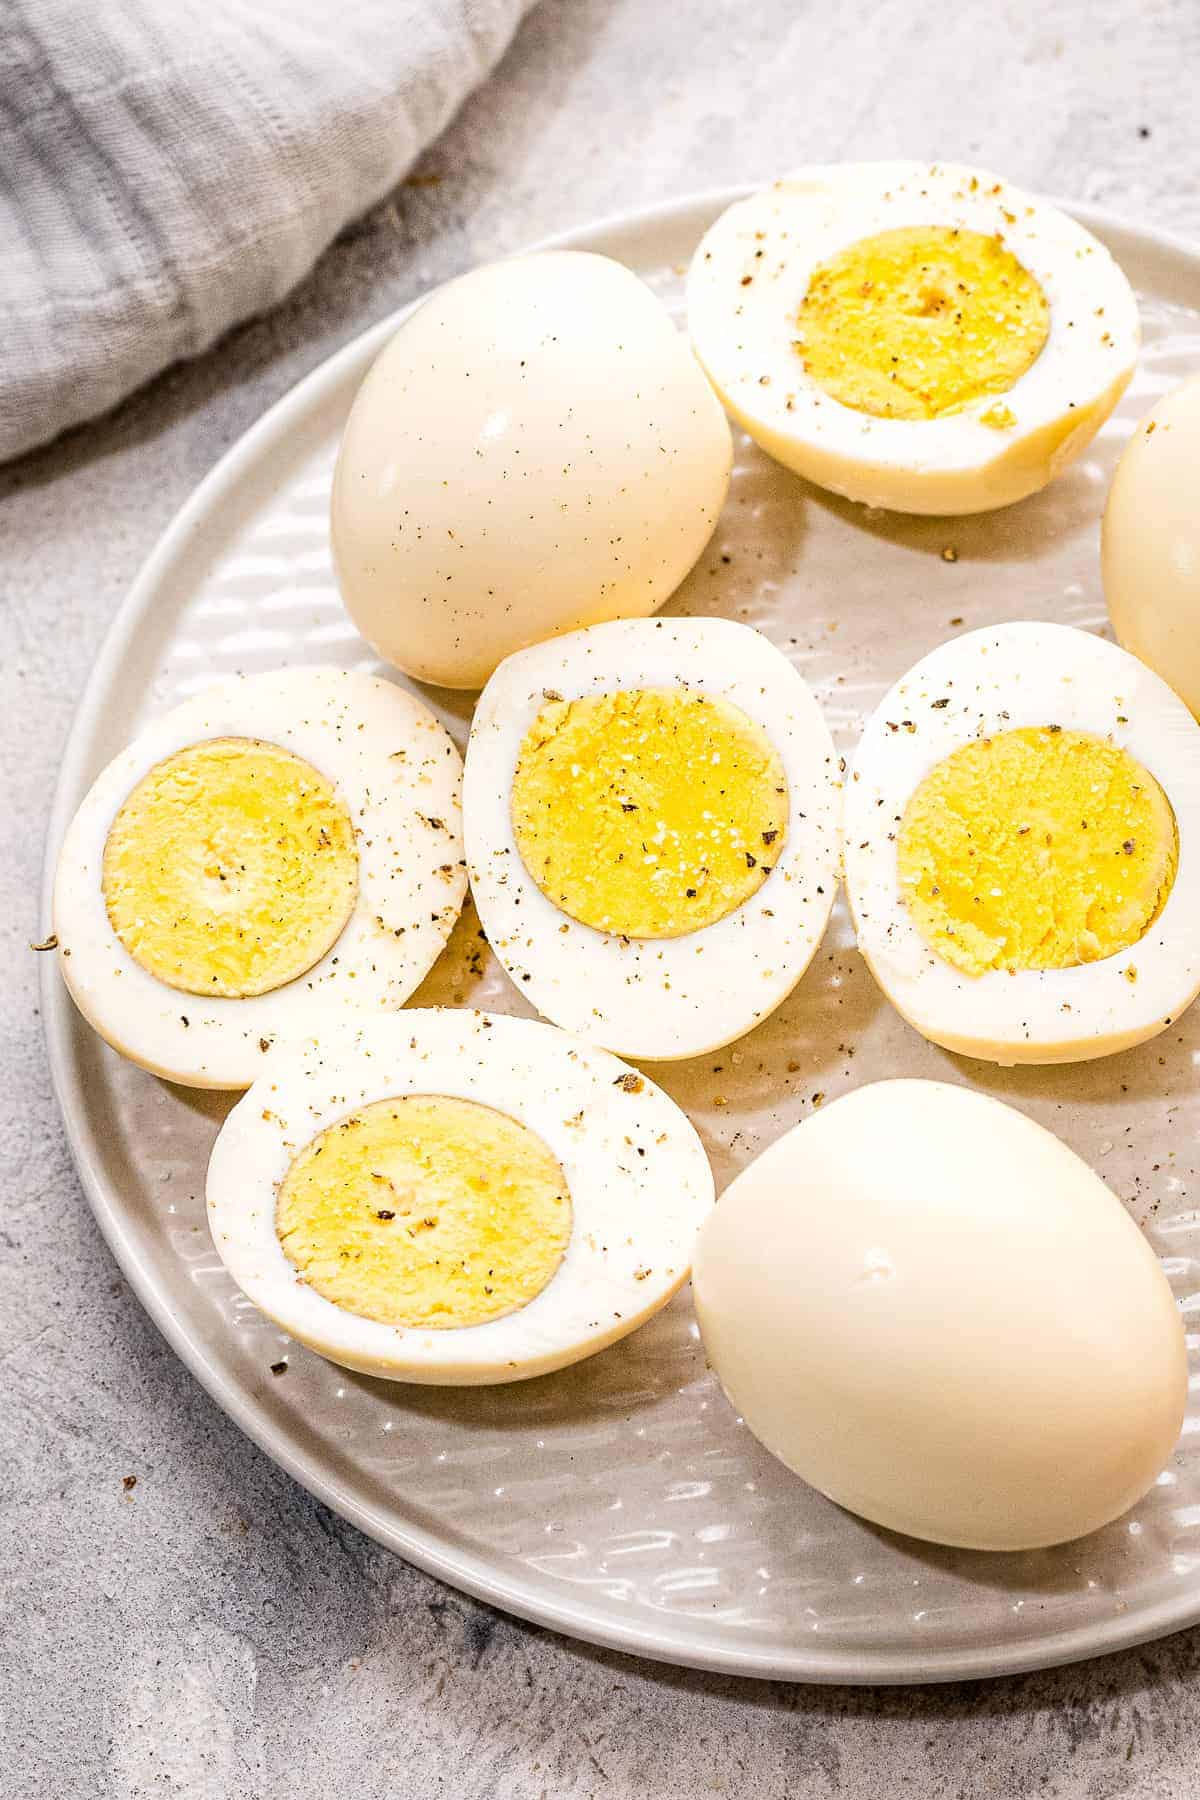 Hard Boiled Eggs with some cut in half on a plate and seasoned with pepper